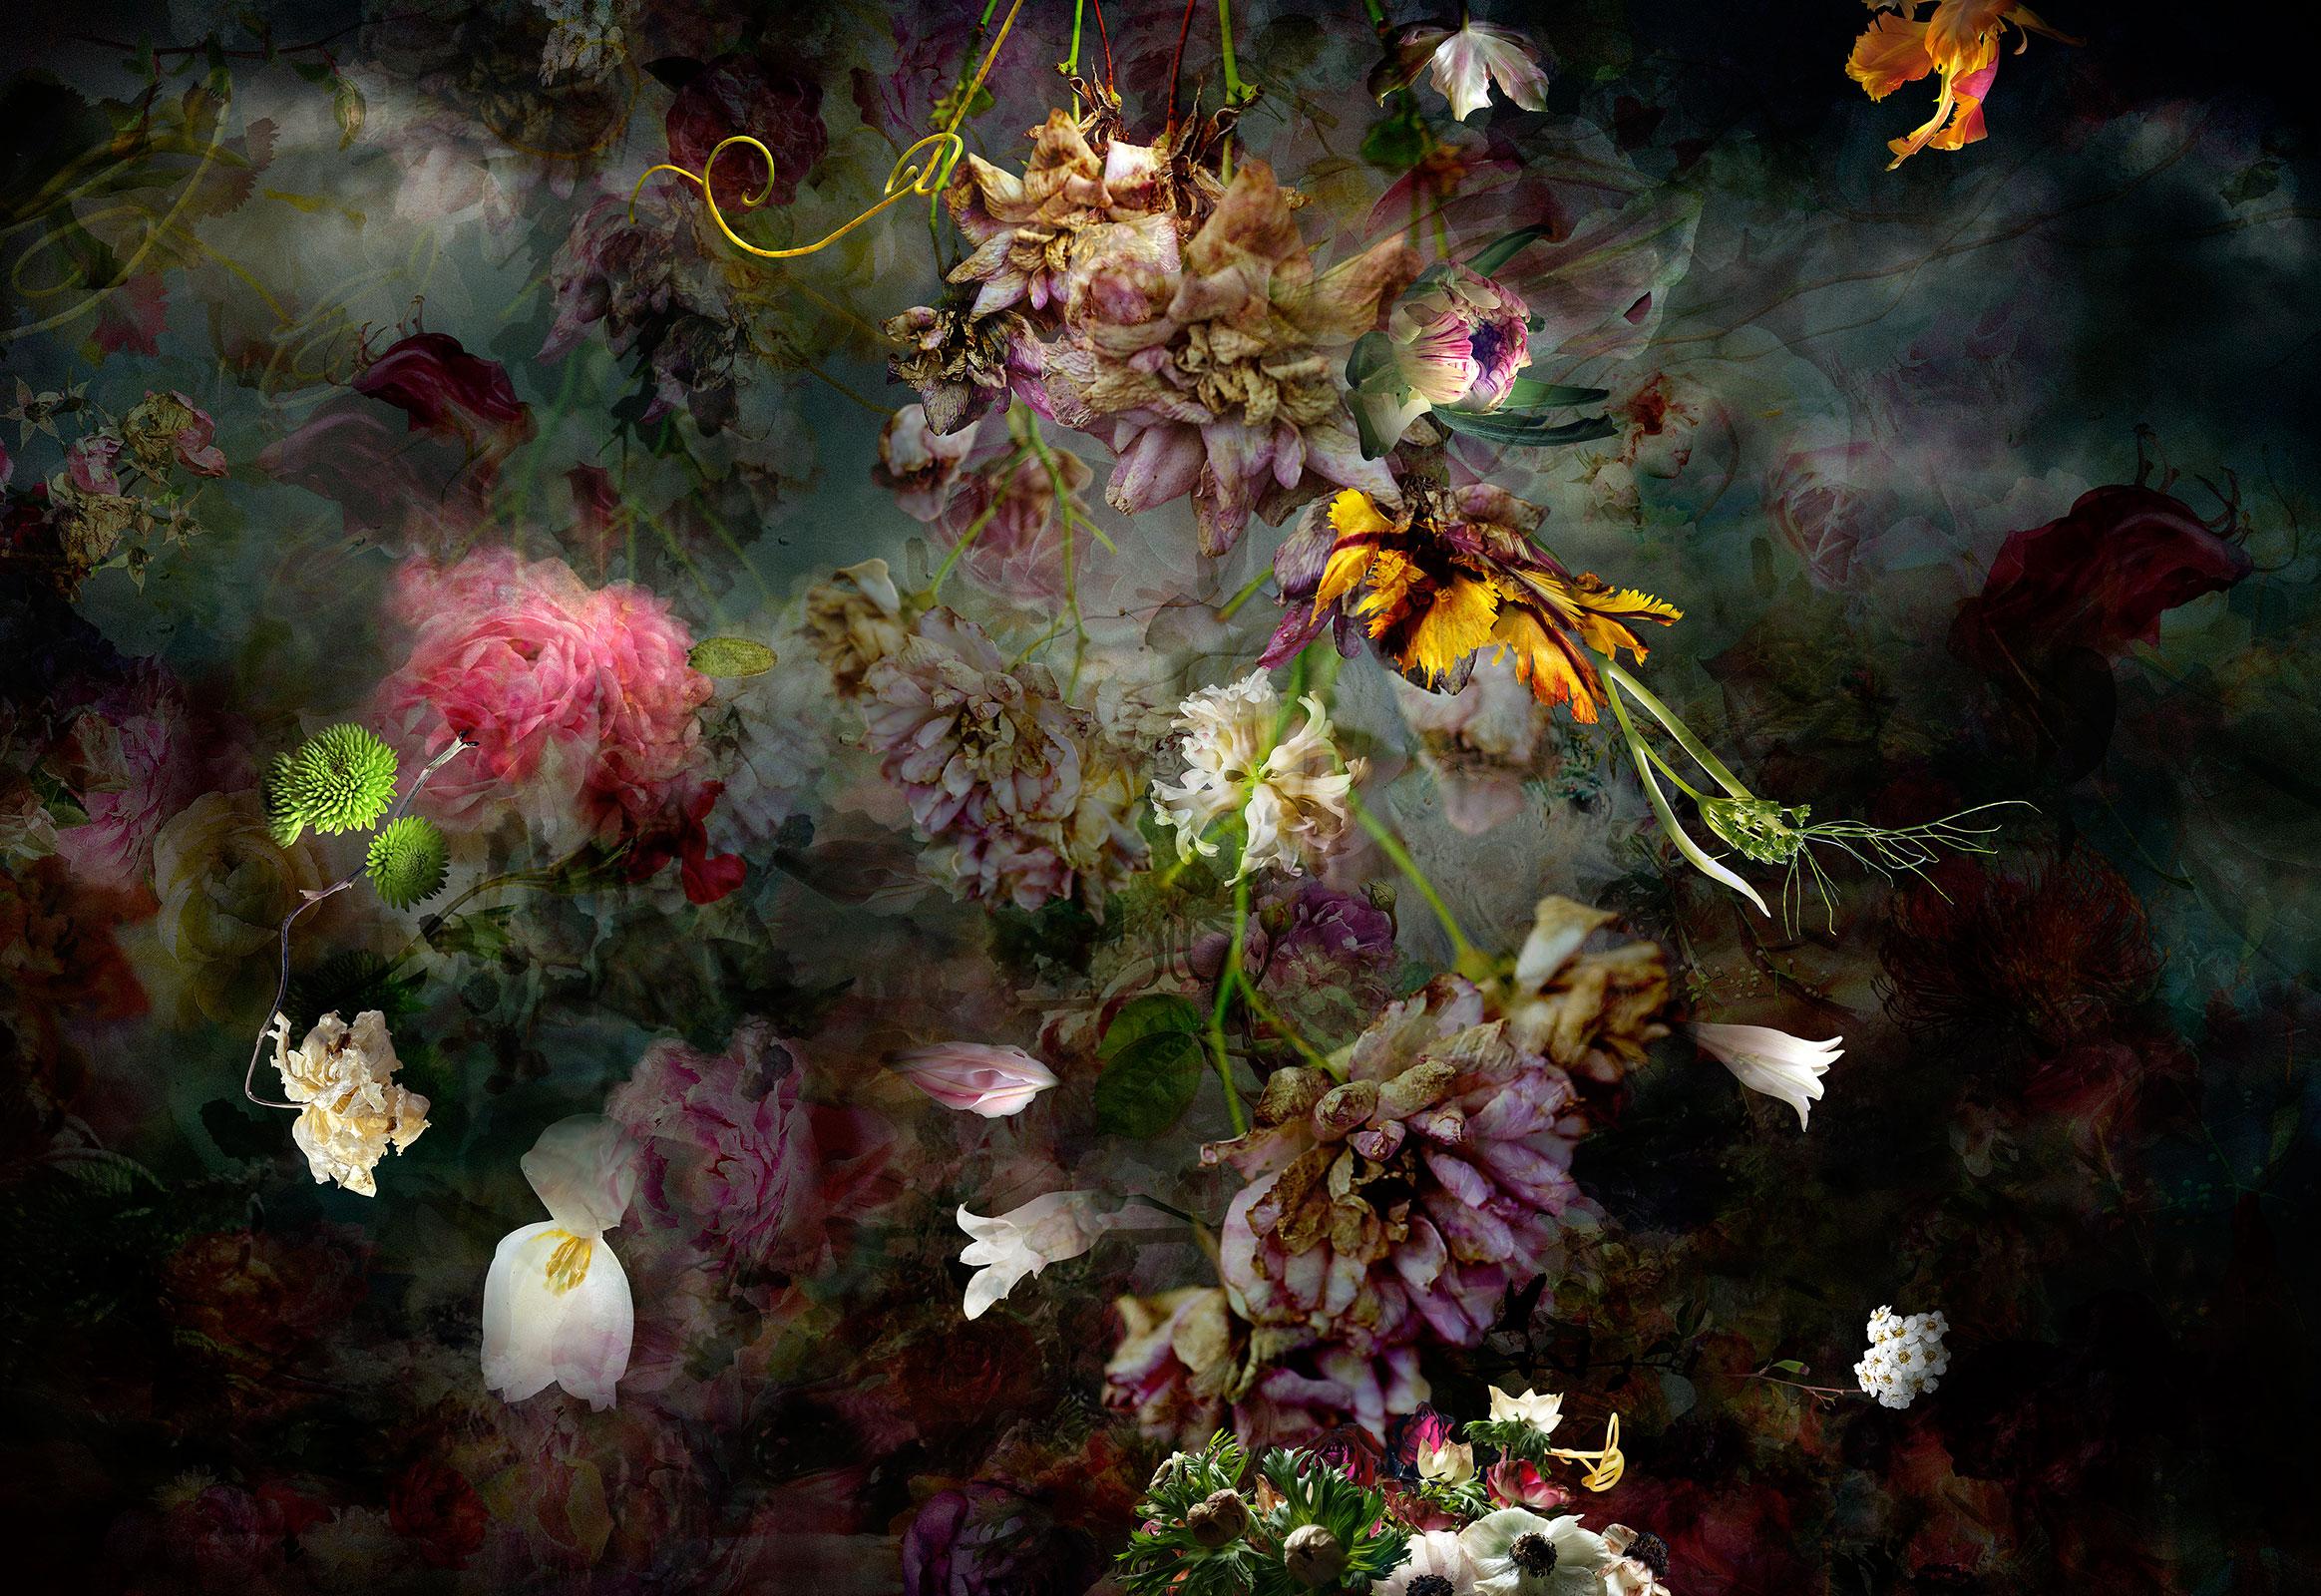 Isabelle Menin Still-Life Photograph - Solstice #3 - Floral still life abstract landscape contemporary photograph